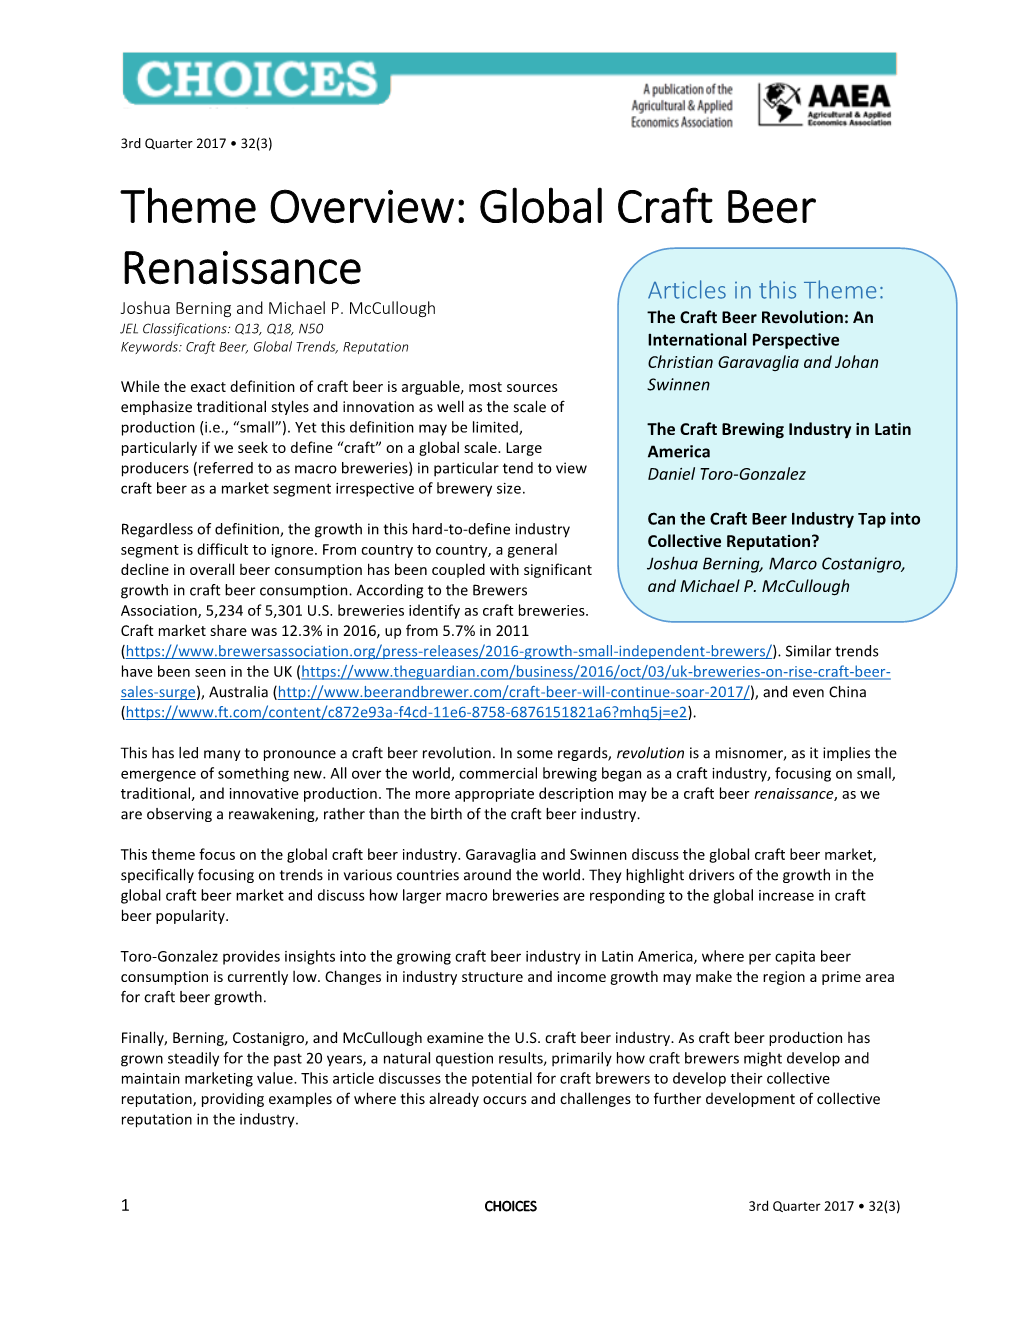 Theme Overview: Global Craft Beer Renaissance